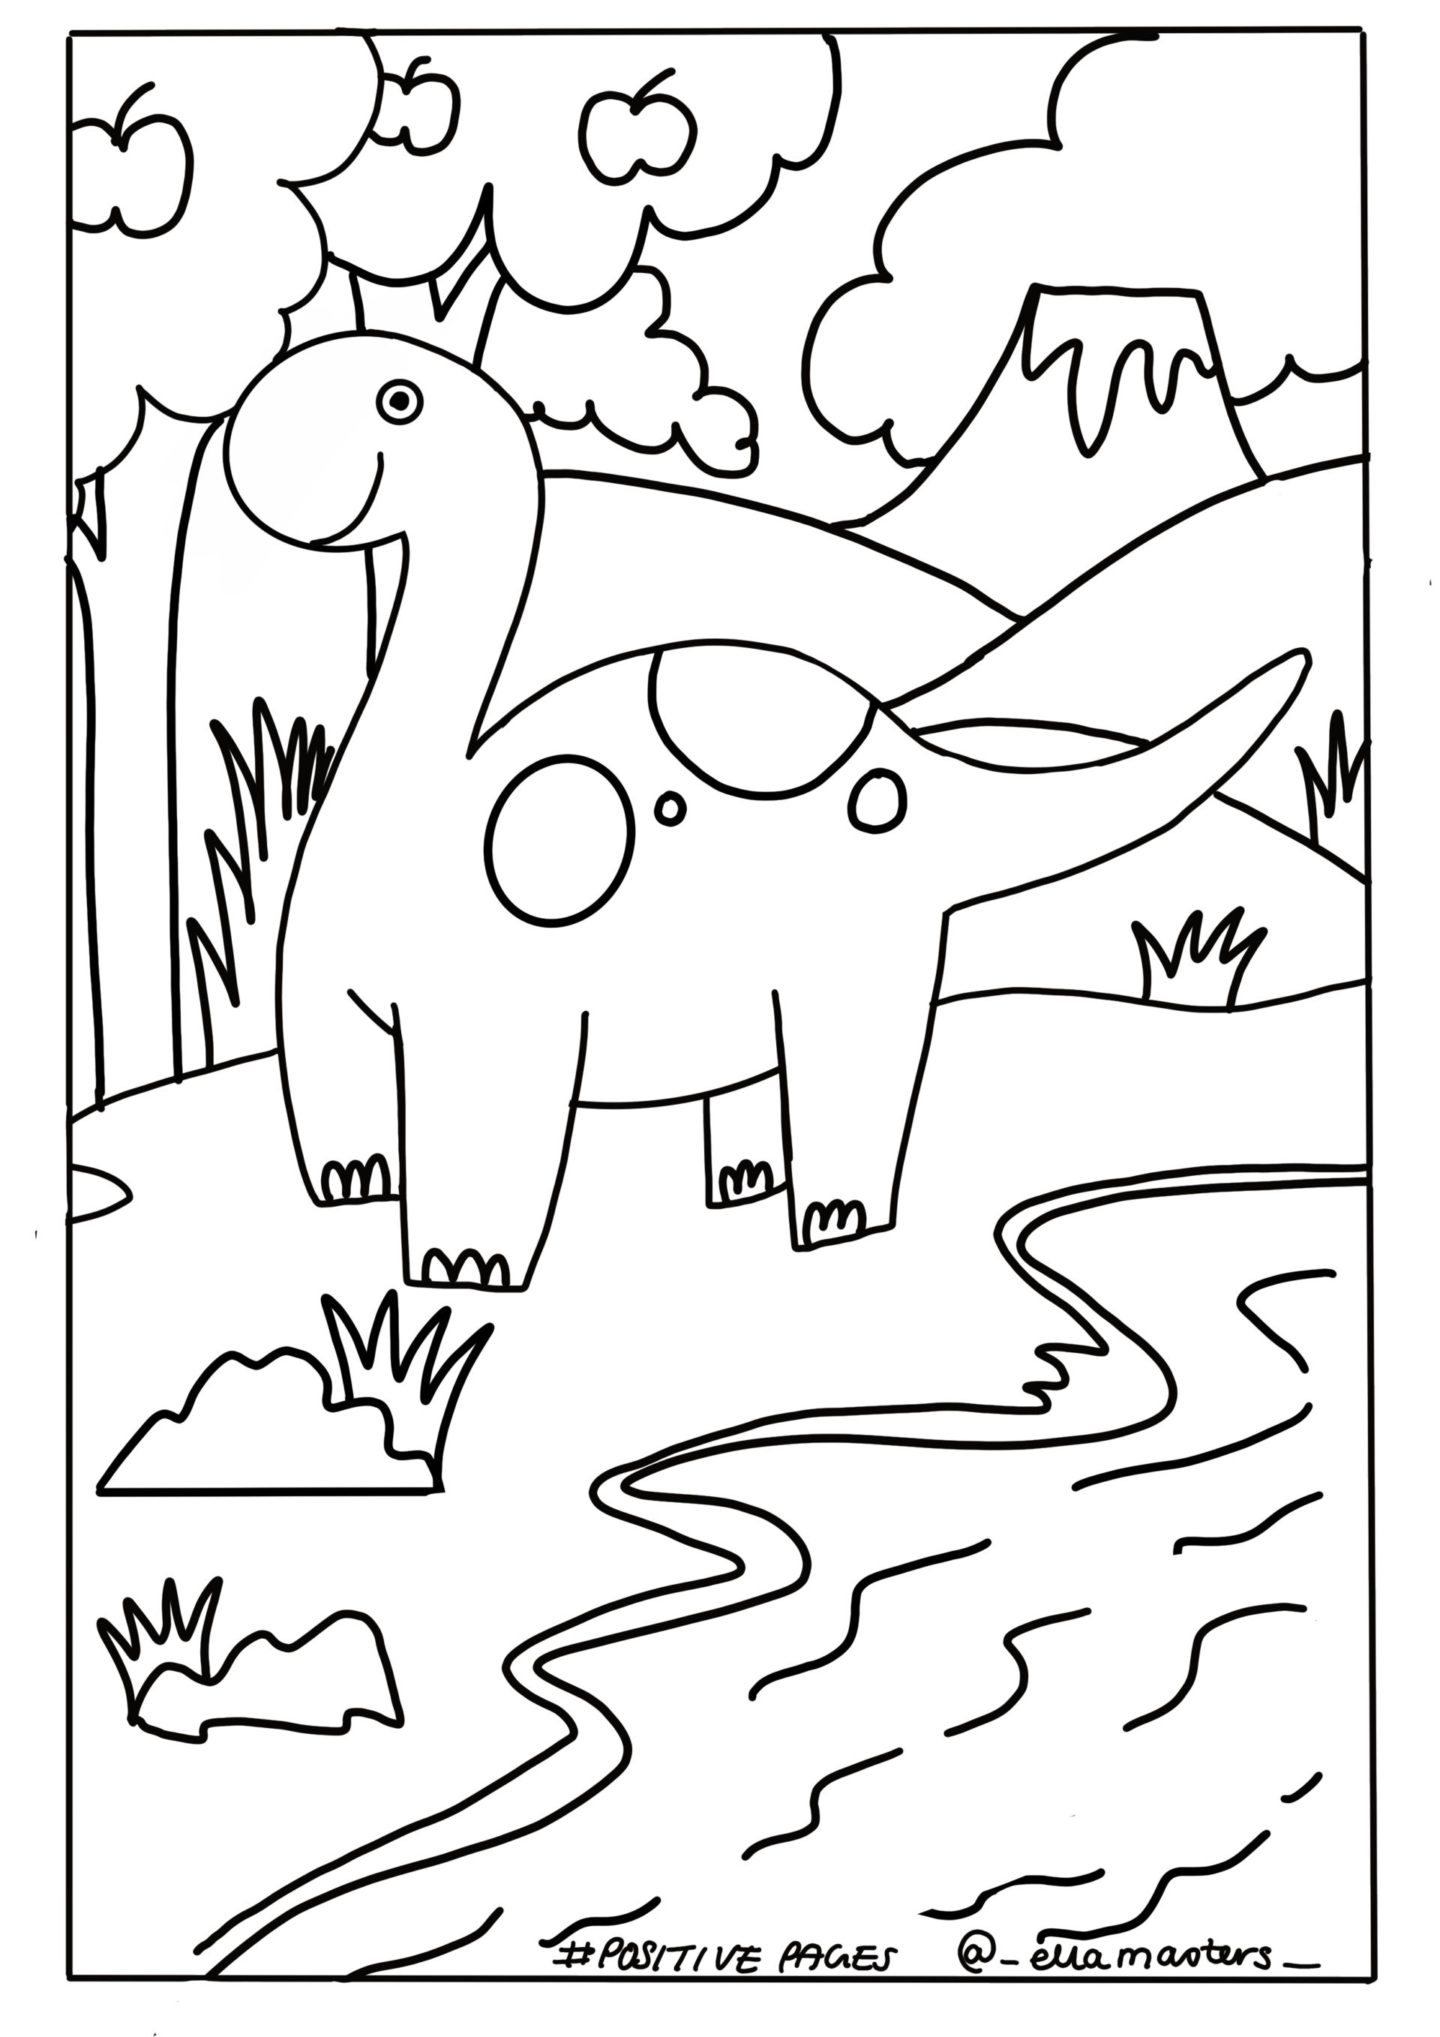 #POSITIVEPAGES - Downloadable children's colouring in pages